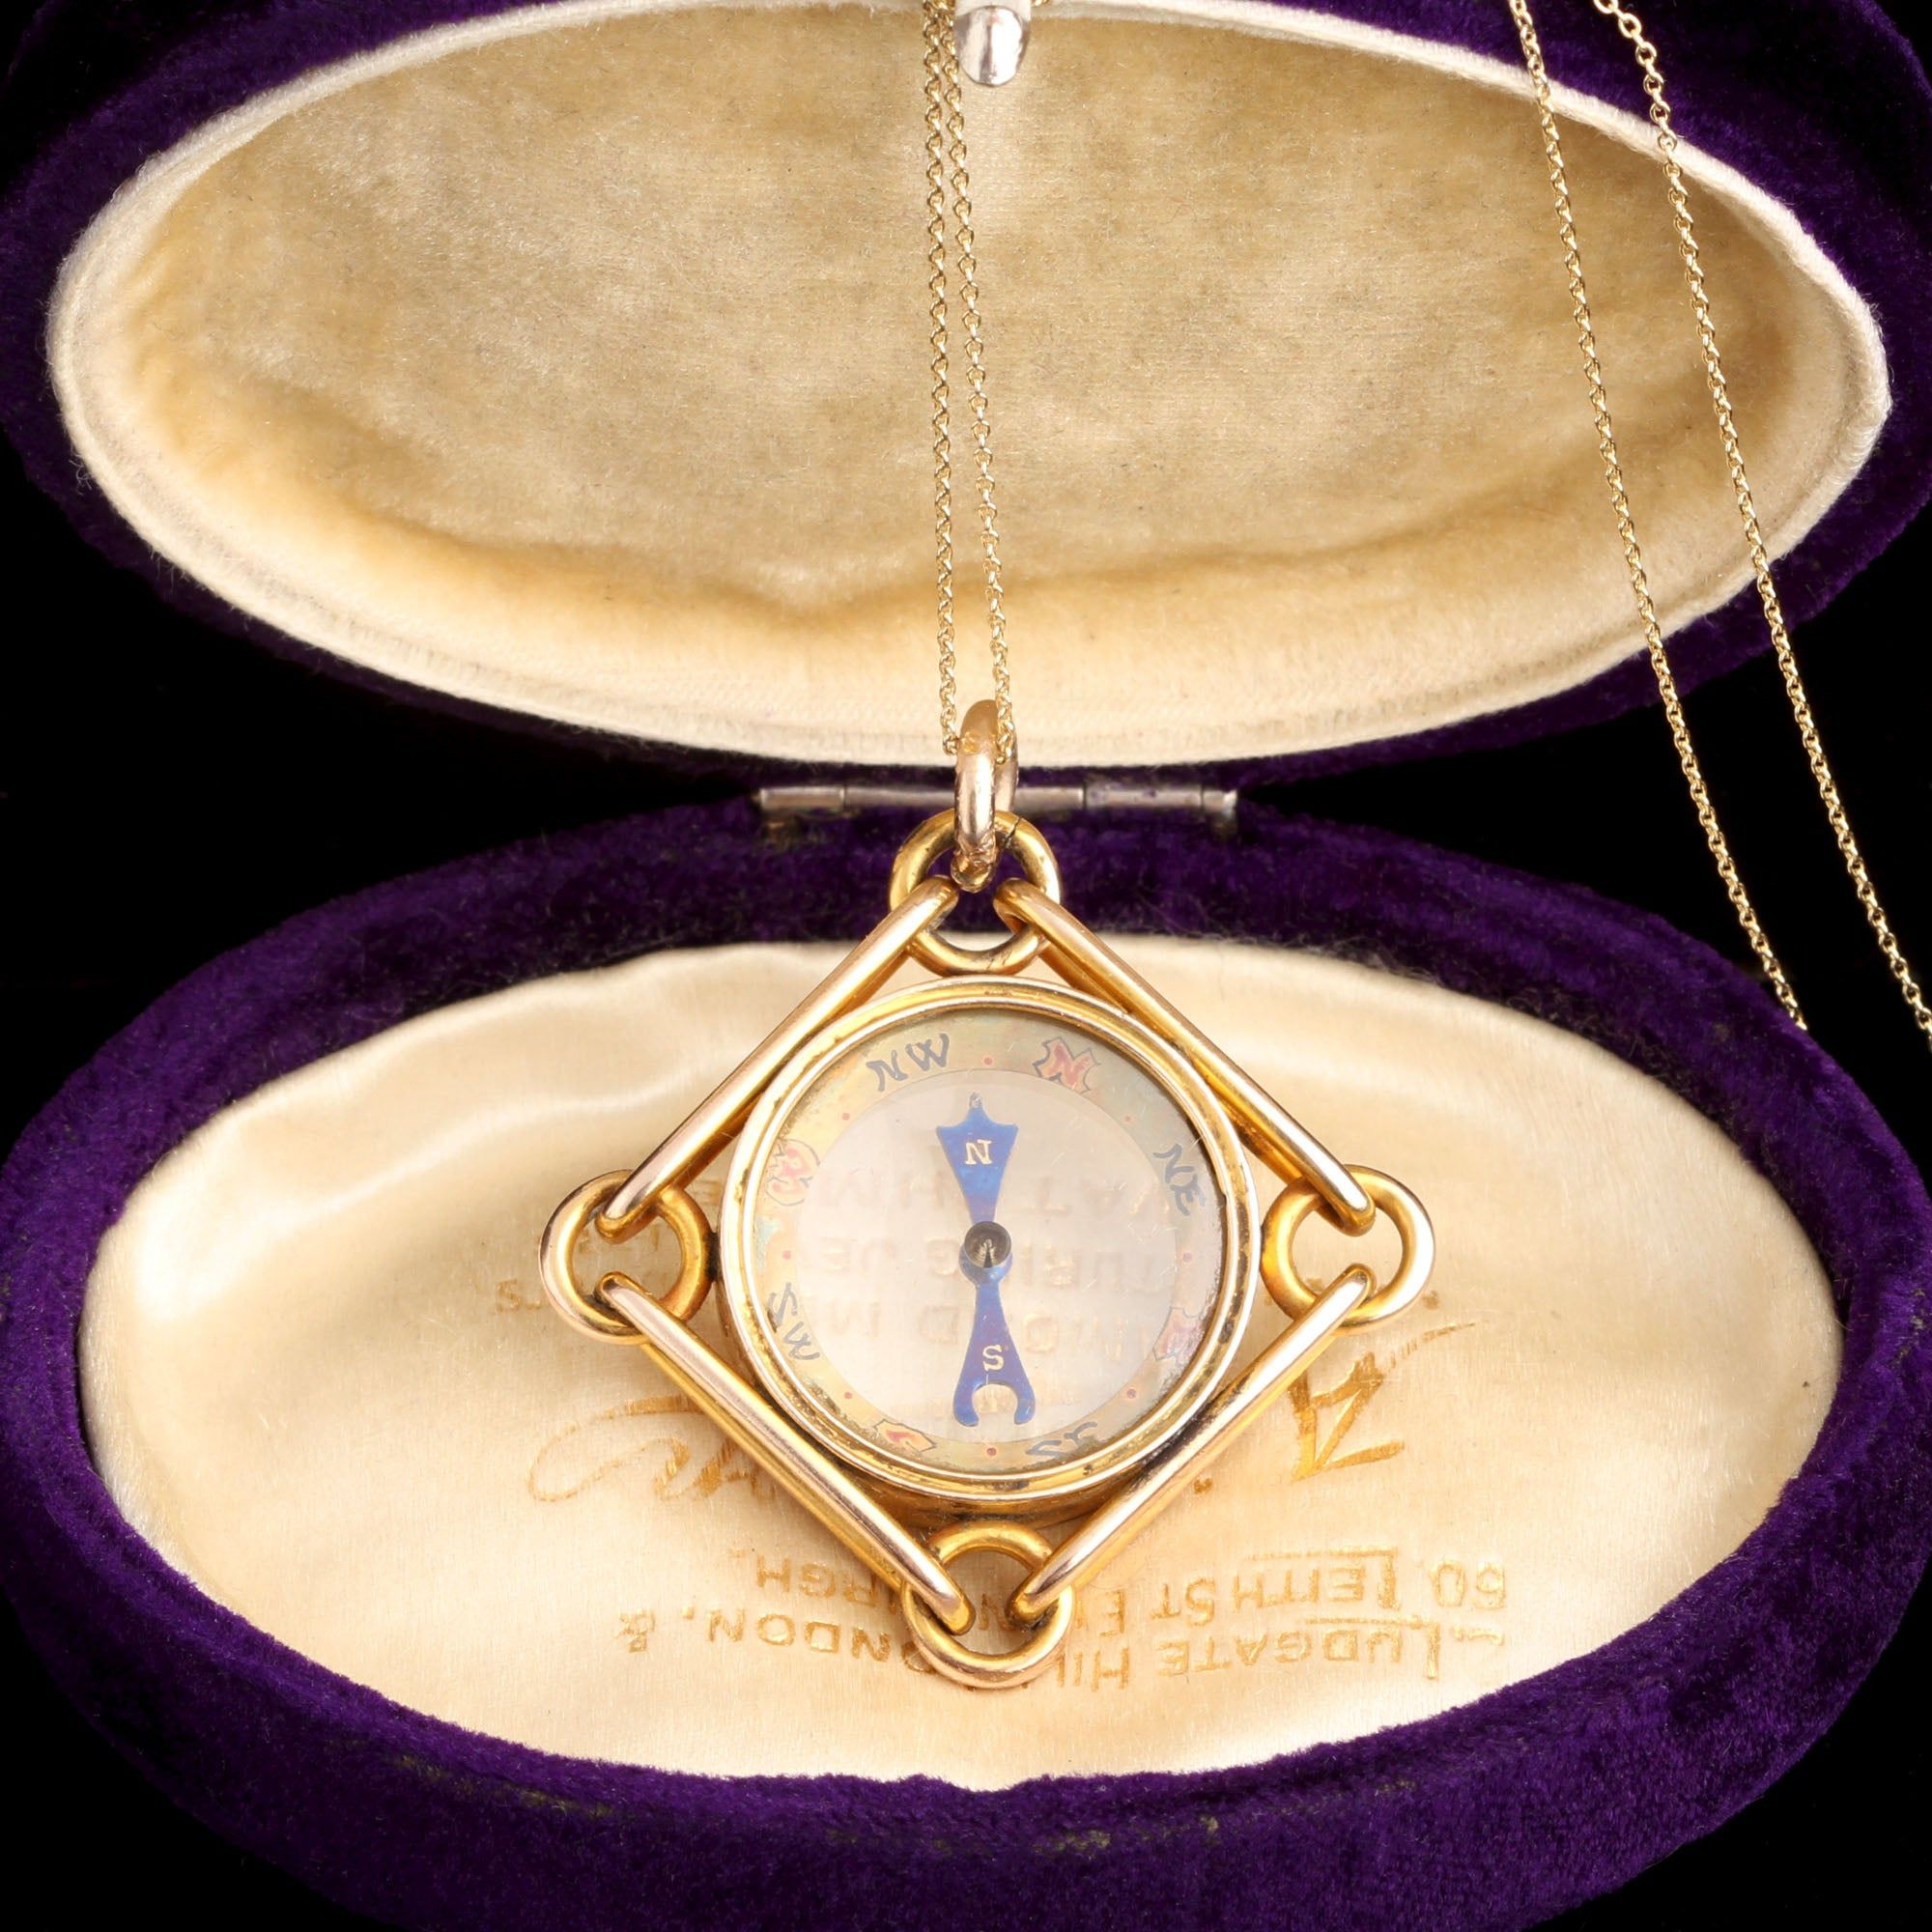 Edwardian Gold Compass Necklace